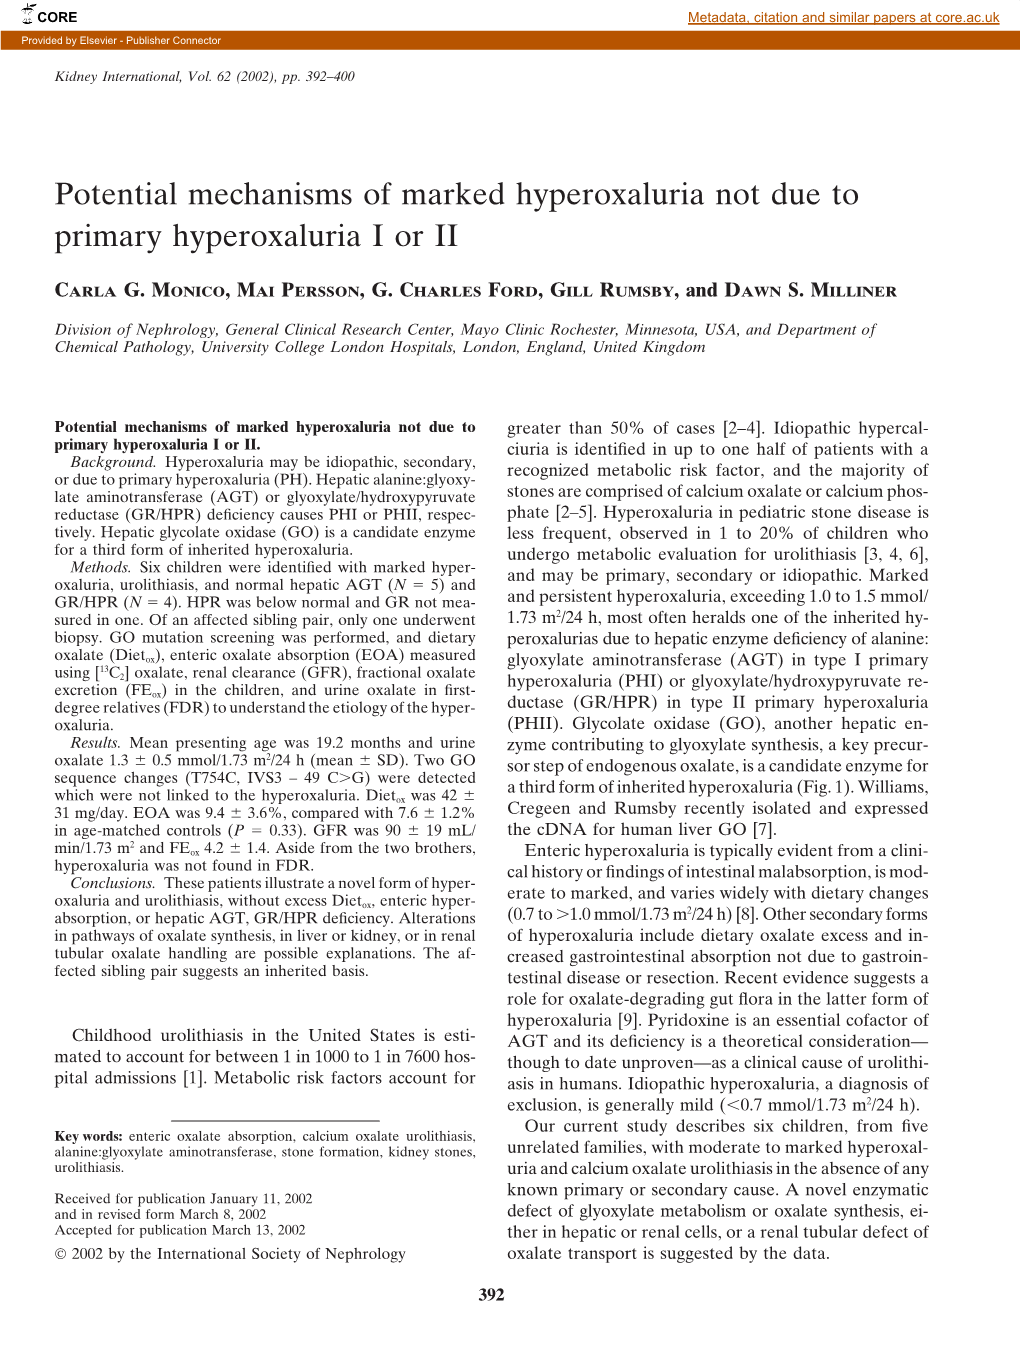 Potential Mechanisms of Marked Hyperoxaluria Not Due to Primary Hyperoxaluria I Or II